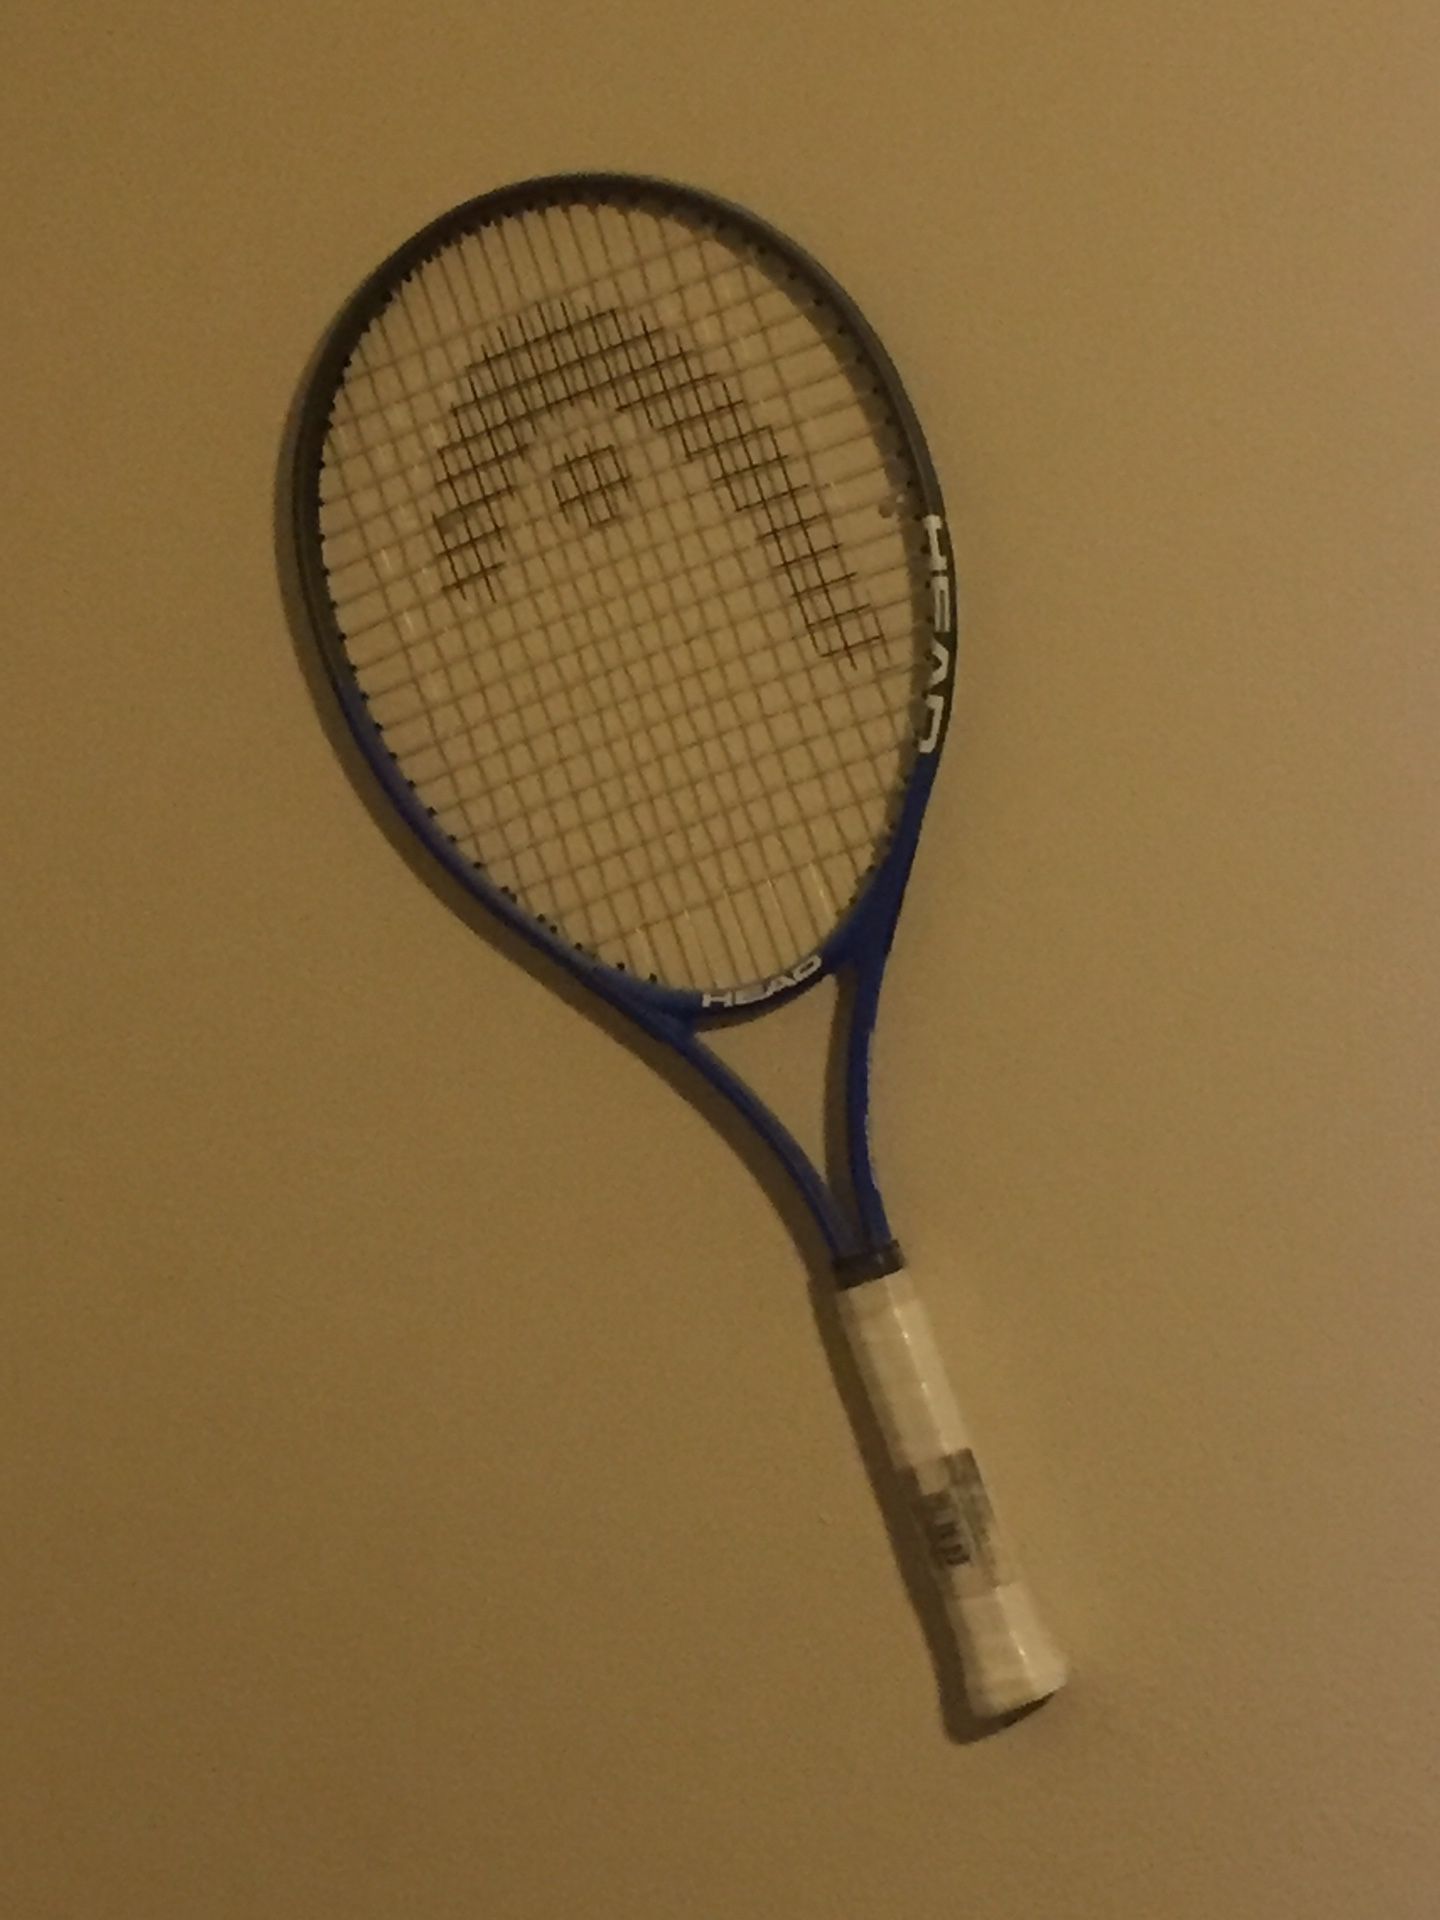 Tennis Rackets two almost new. Comes with tennis 🎾 balls